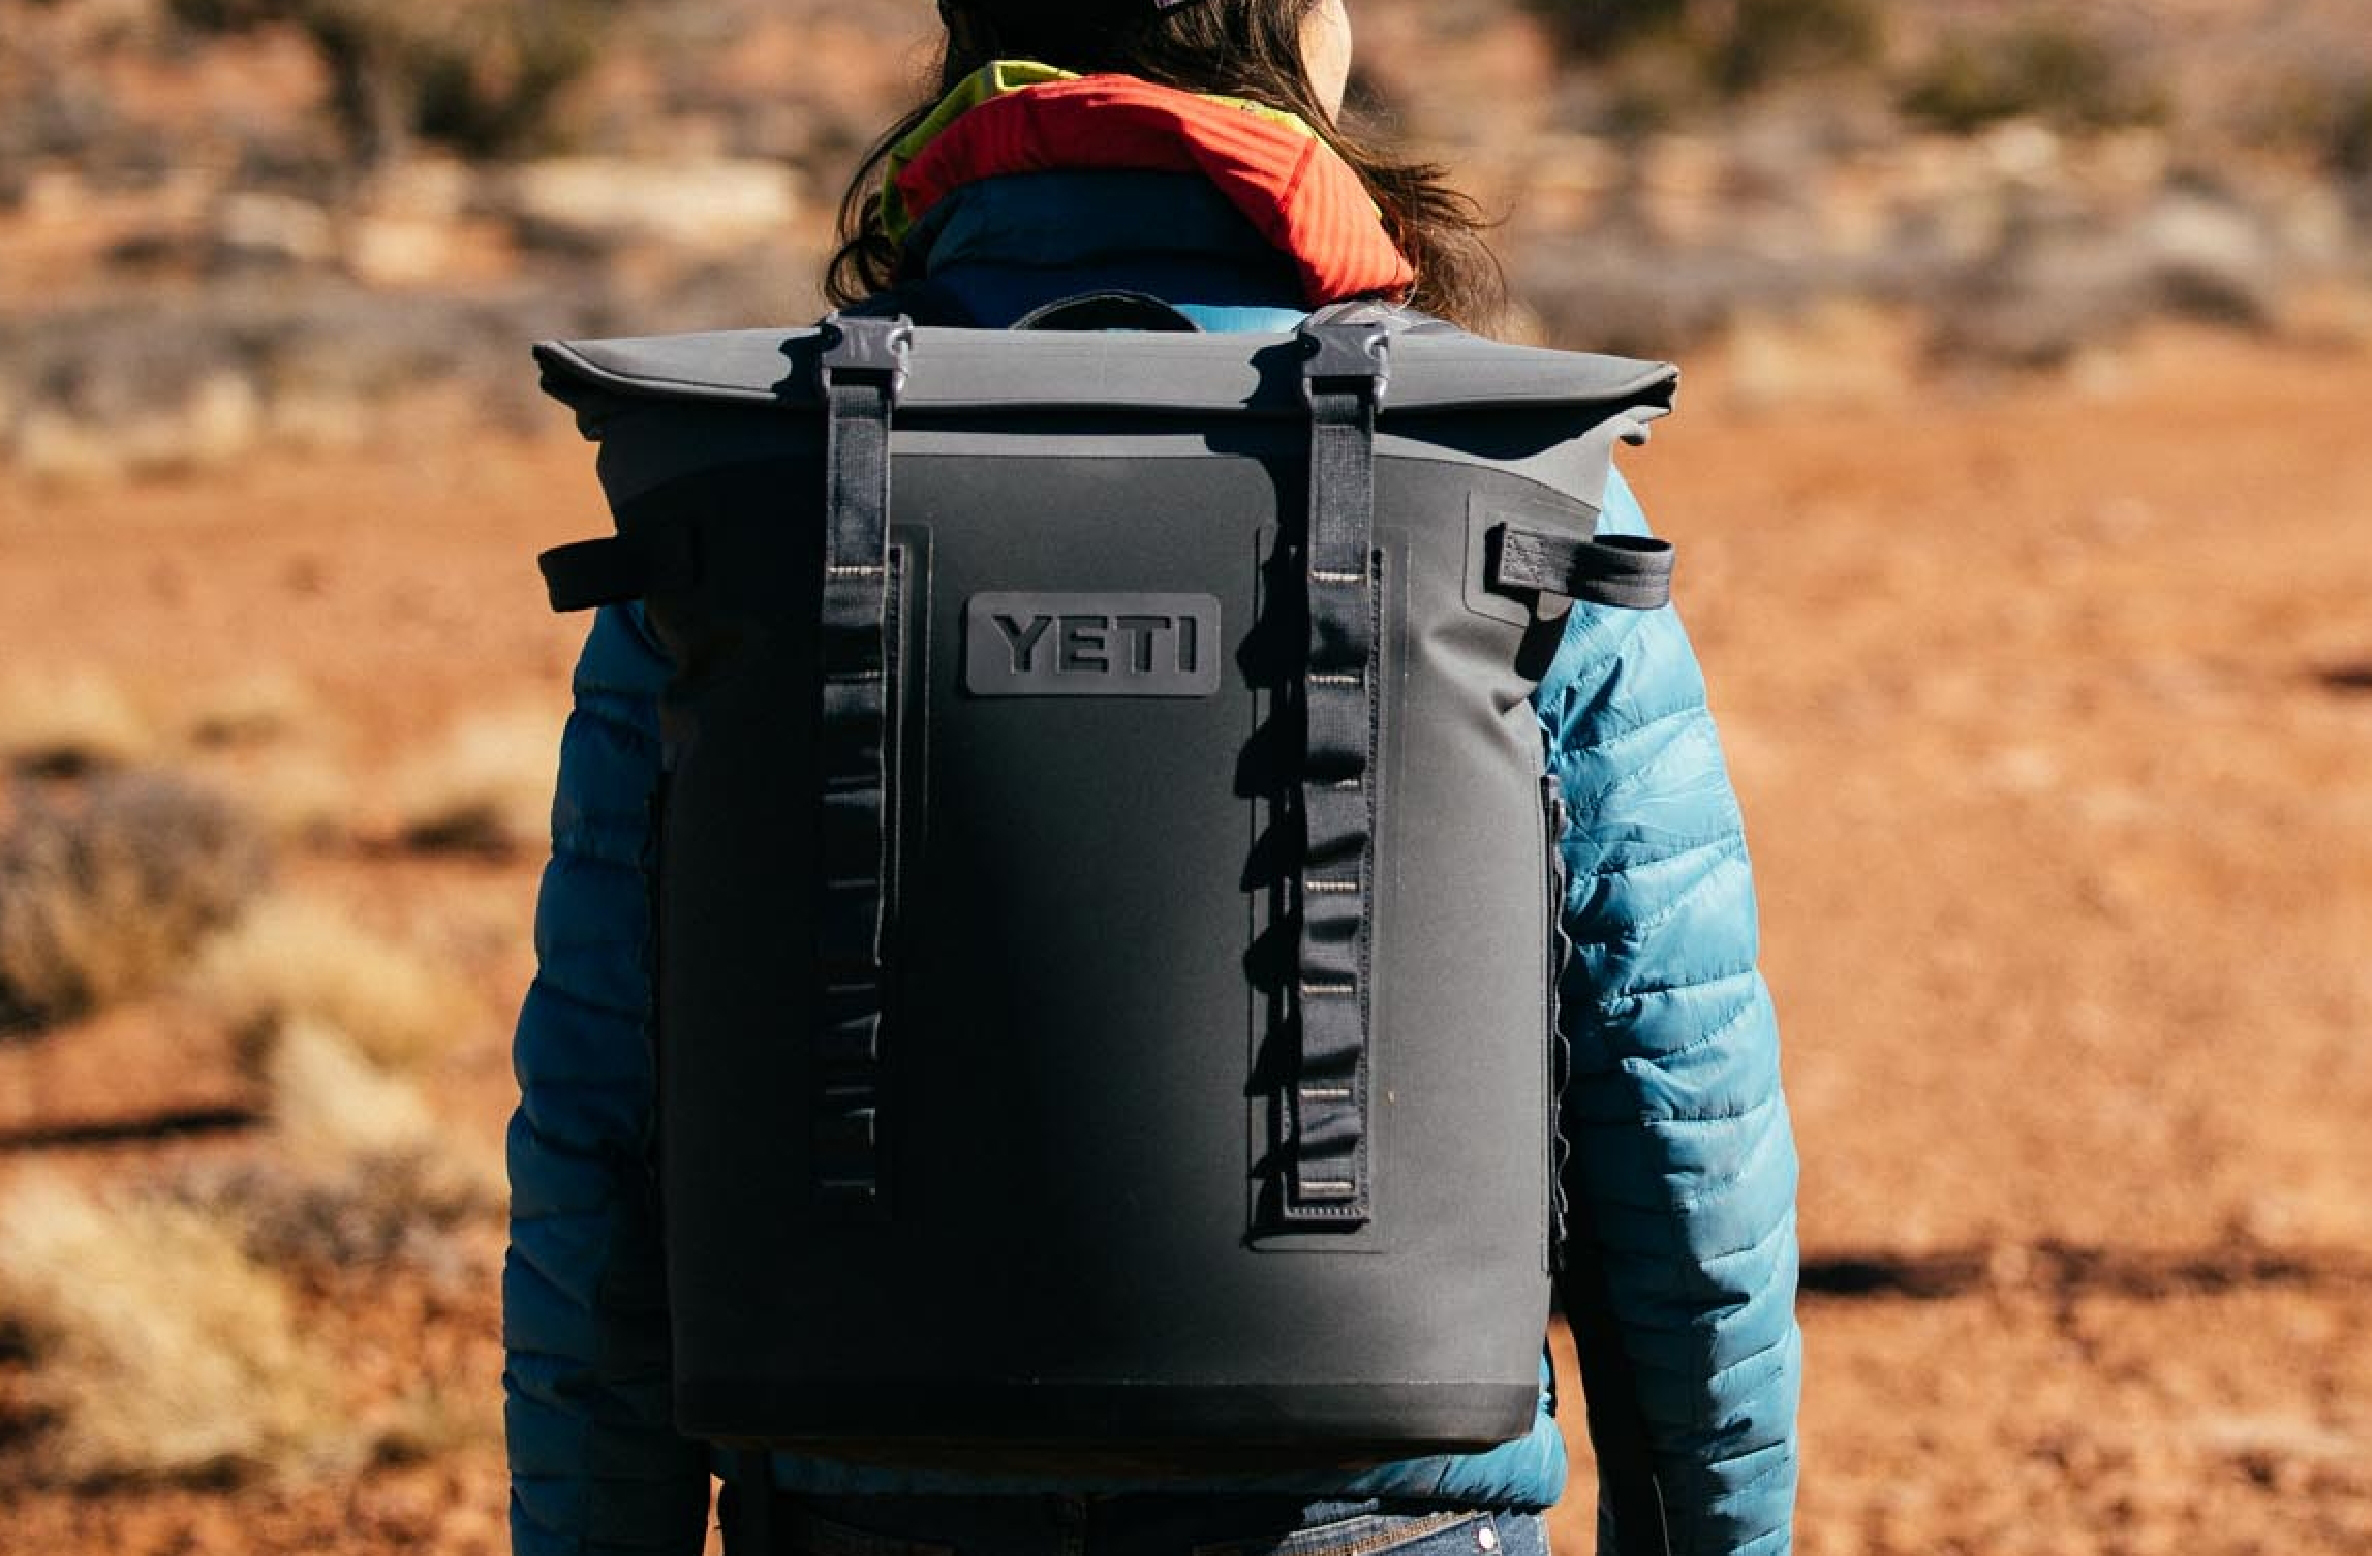 Yeti Hopper Backpack Cooler, from CD 190 crop